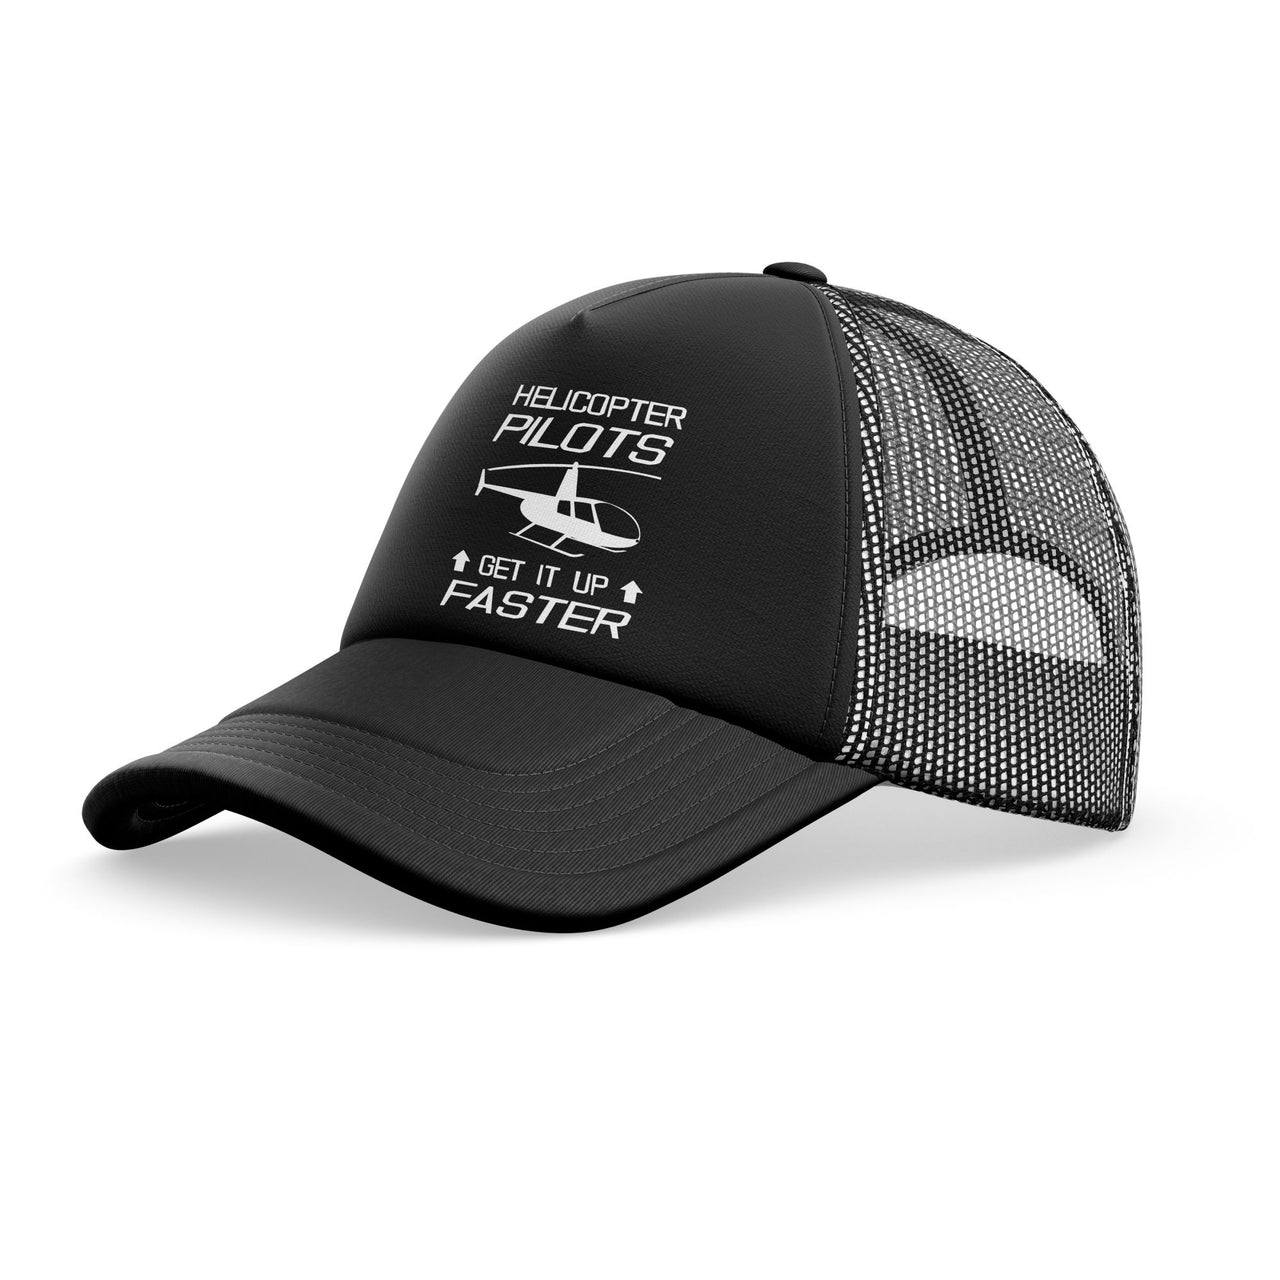 Helicopter Pilots Get It Up Faster Designed Trucker Caps & Hats